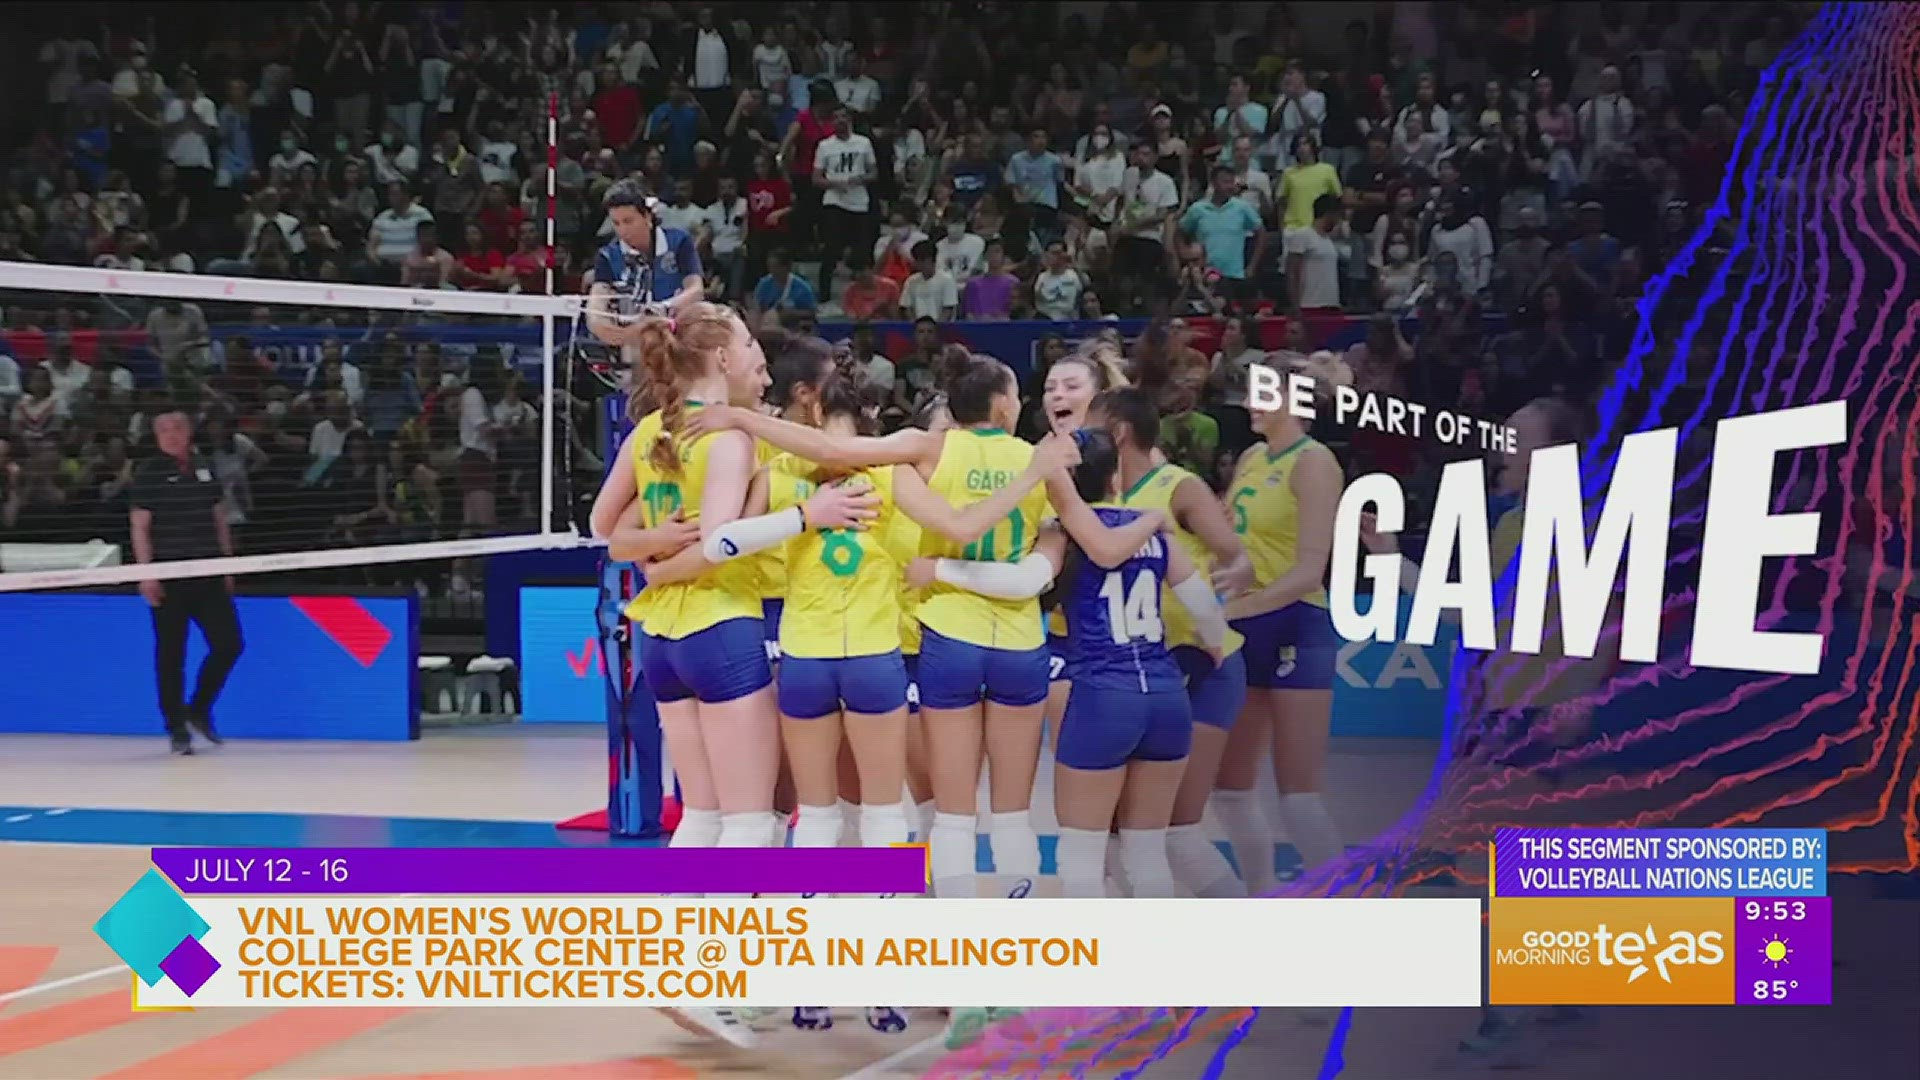 Be Part of the Volleyball Nations League Womens World Finals wfaa